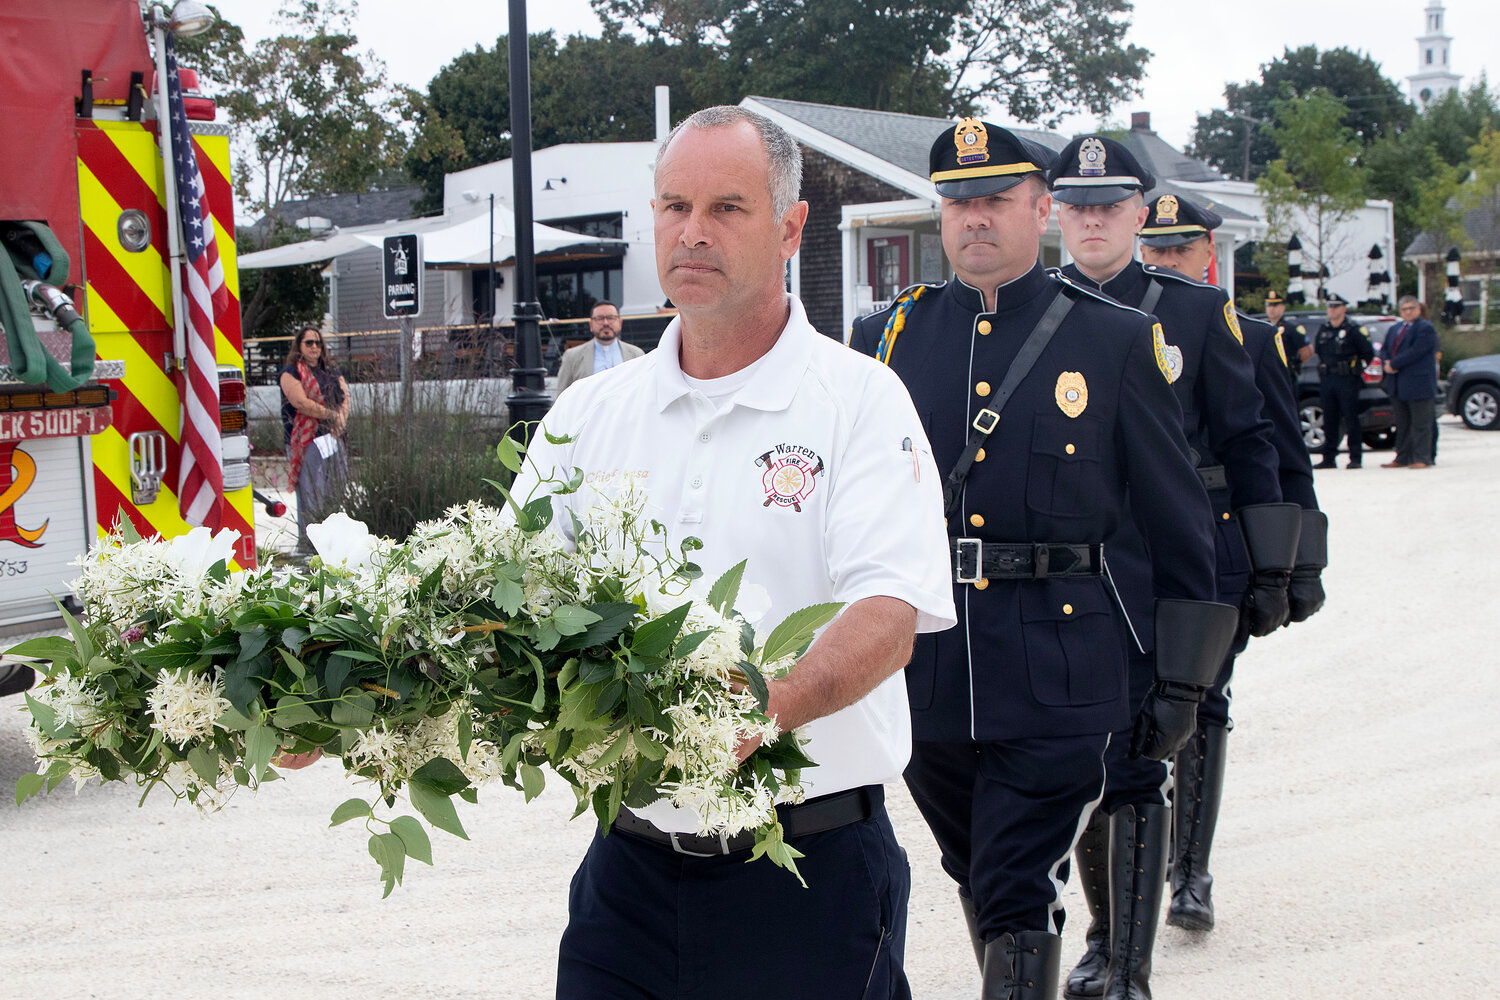 Fire Chief James Sousa walks towards the water to place a memorial wreath into the river in remembrance of those who perished on Sept. 11, 2001.